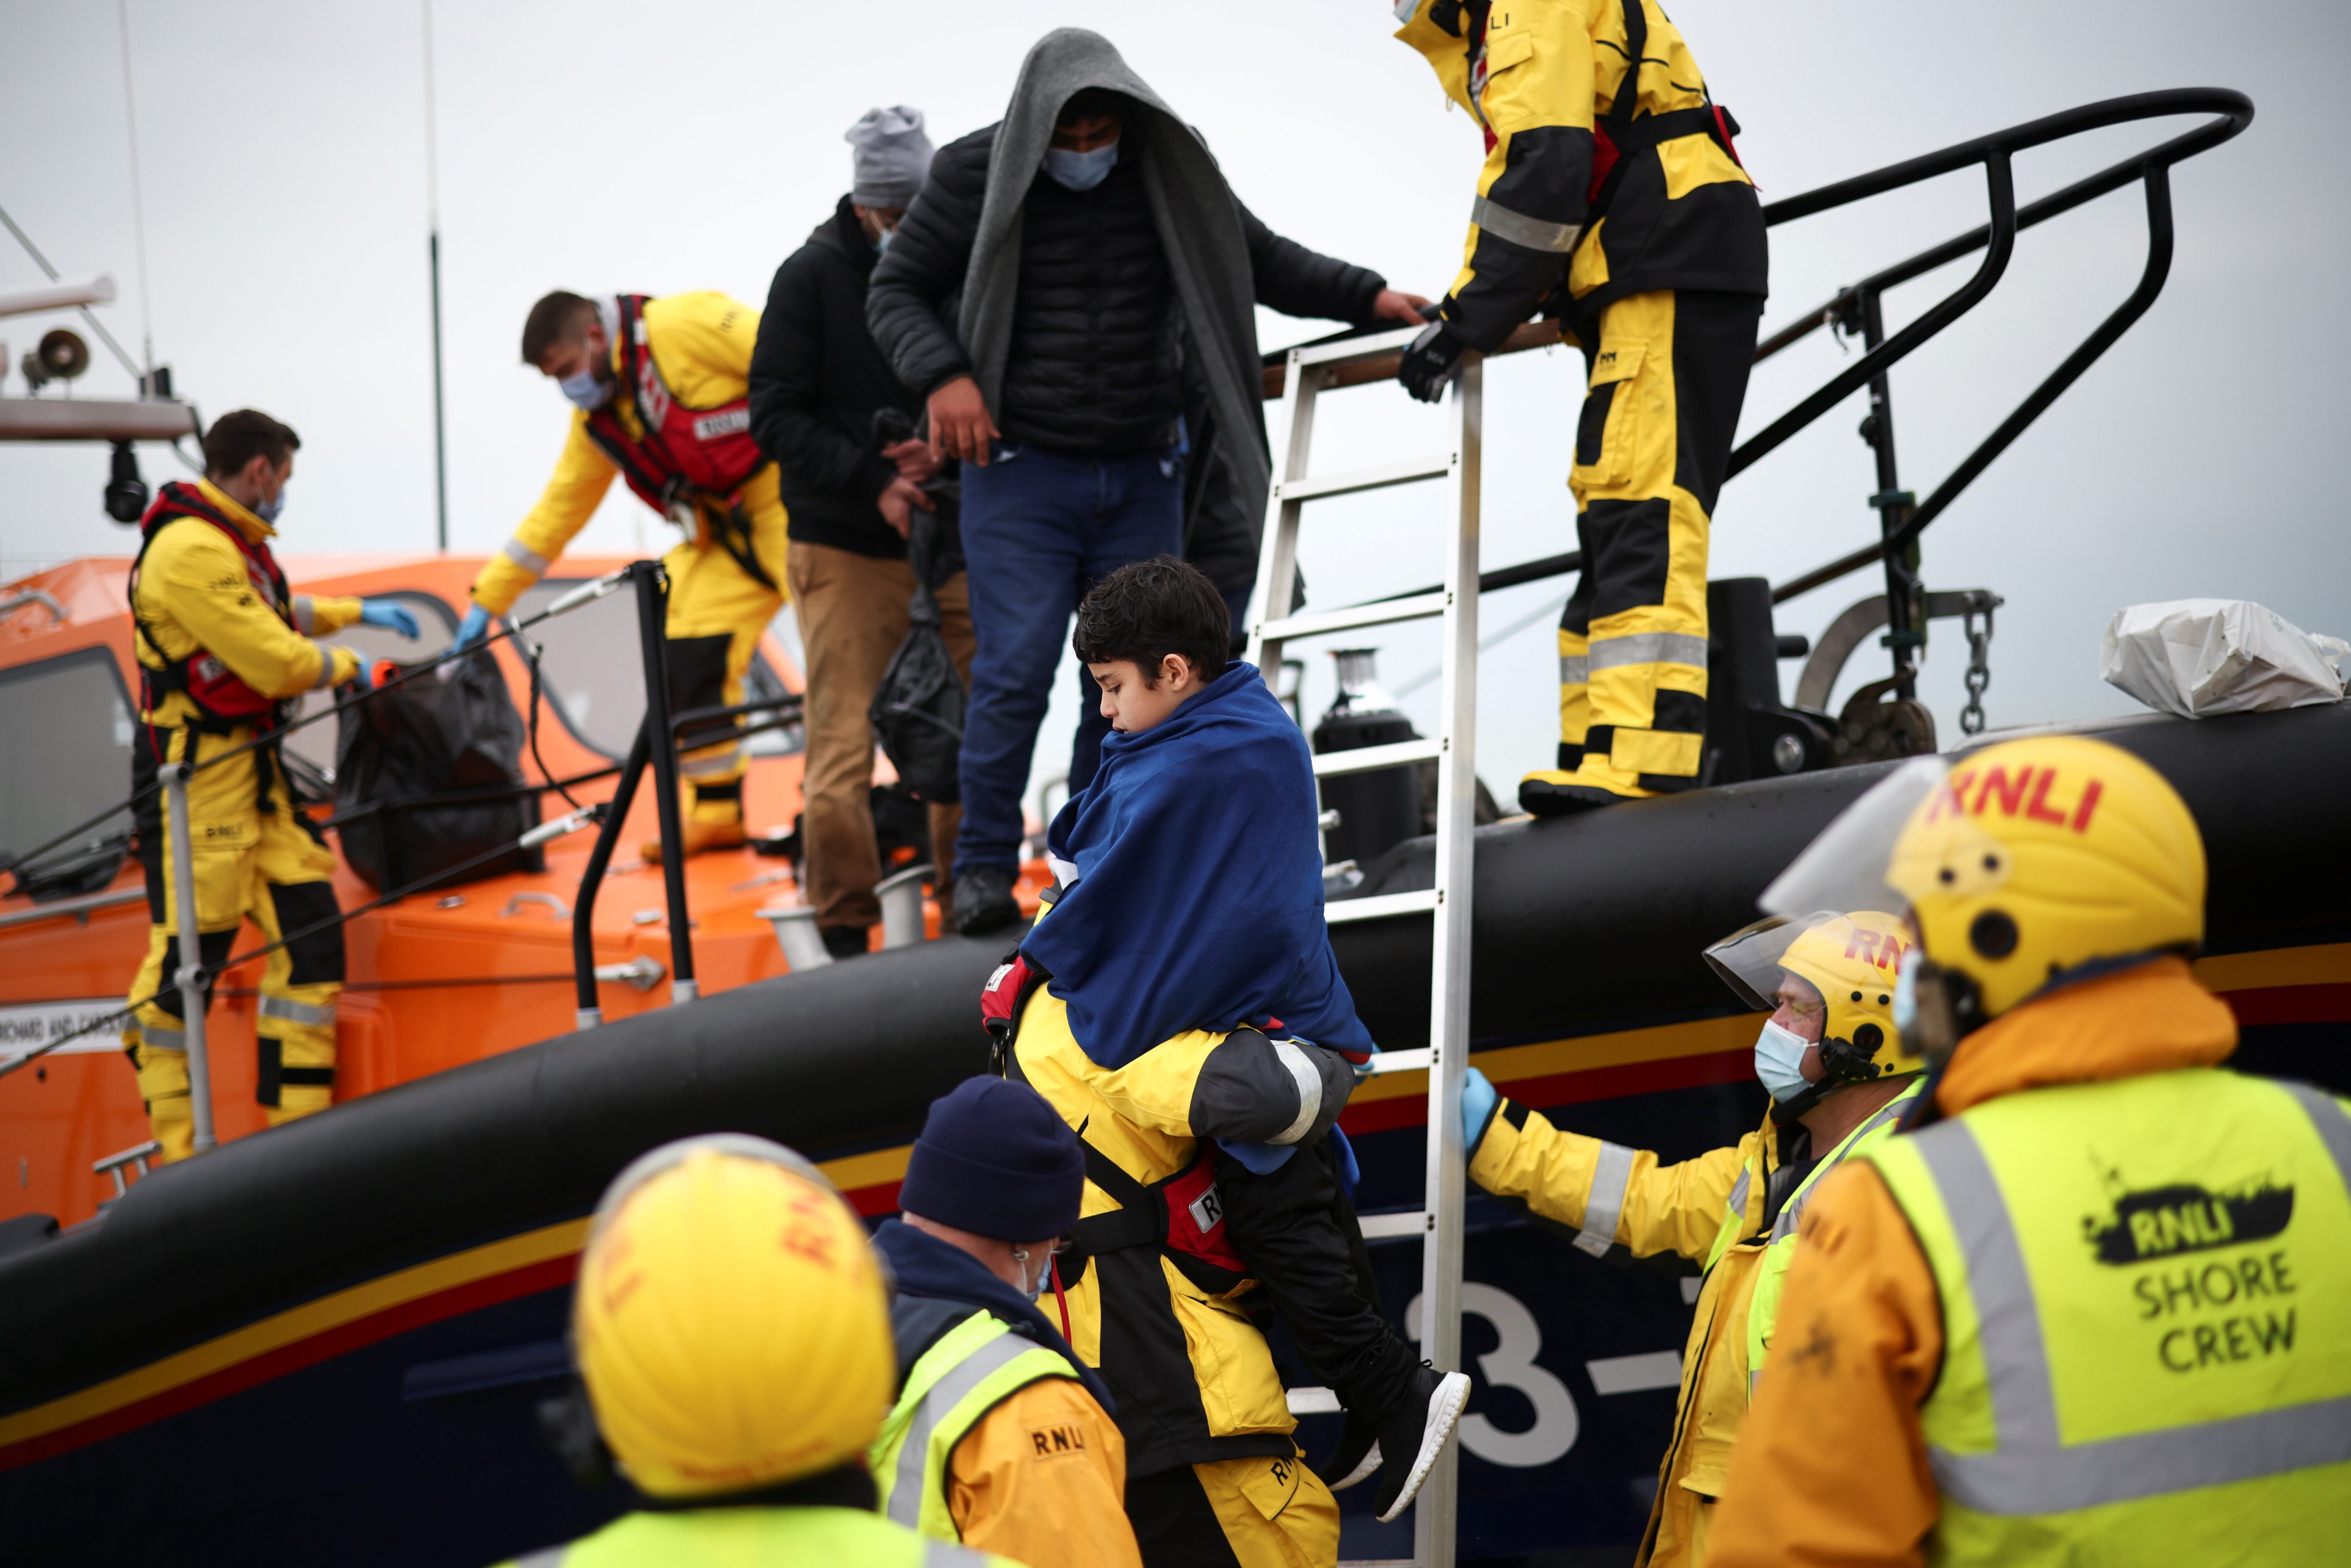 27 migrants perish trying to cross Channel to Britain